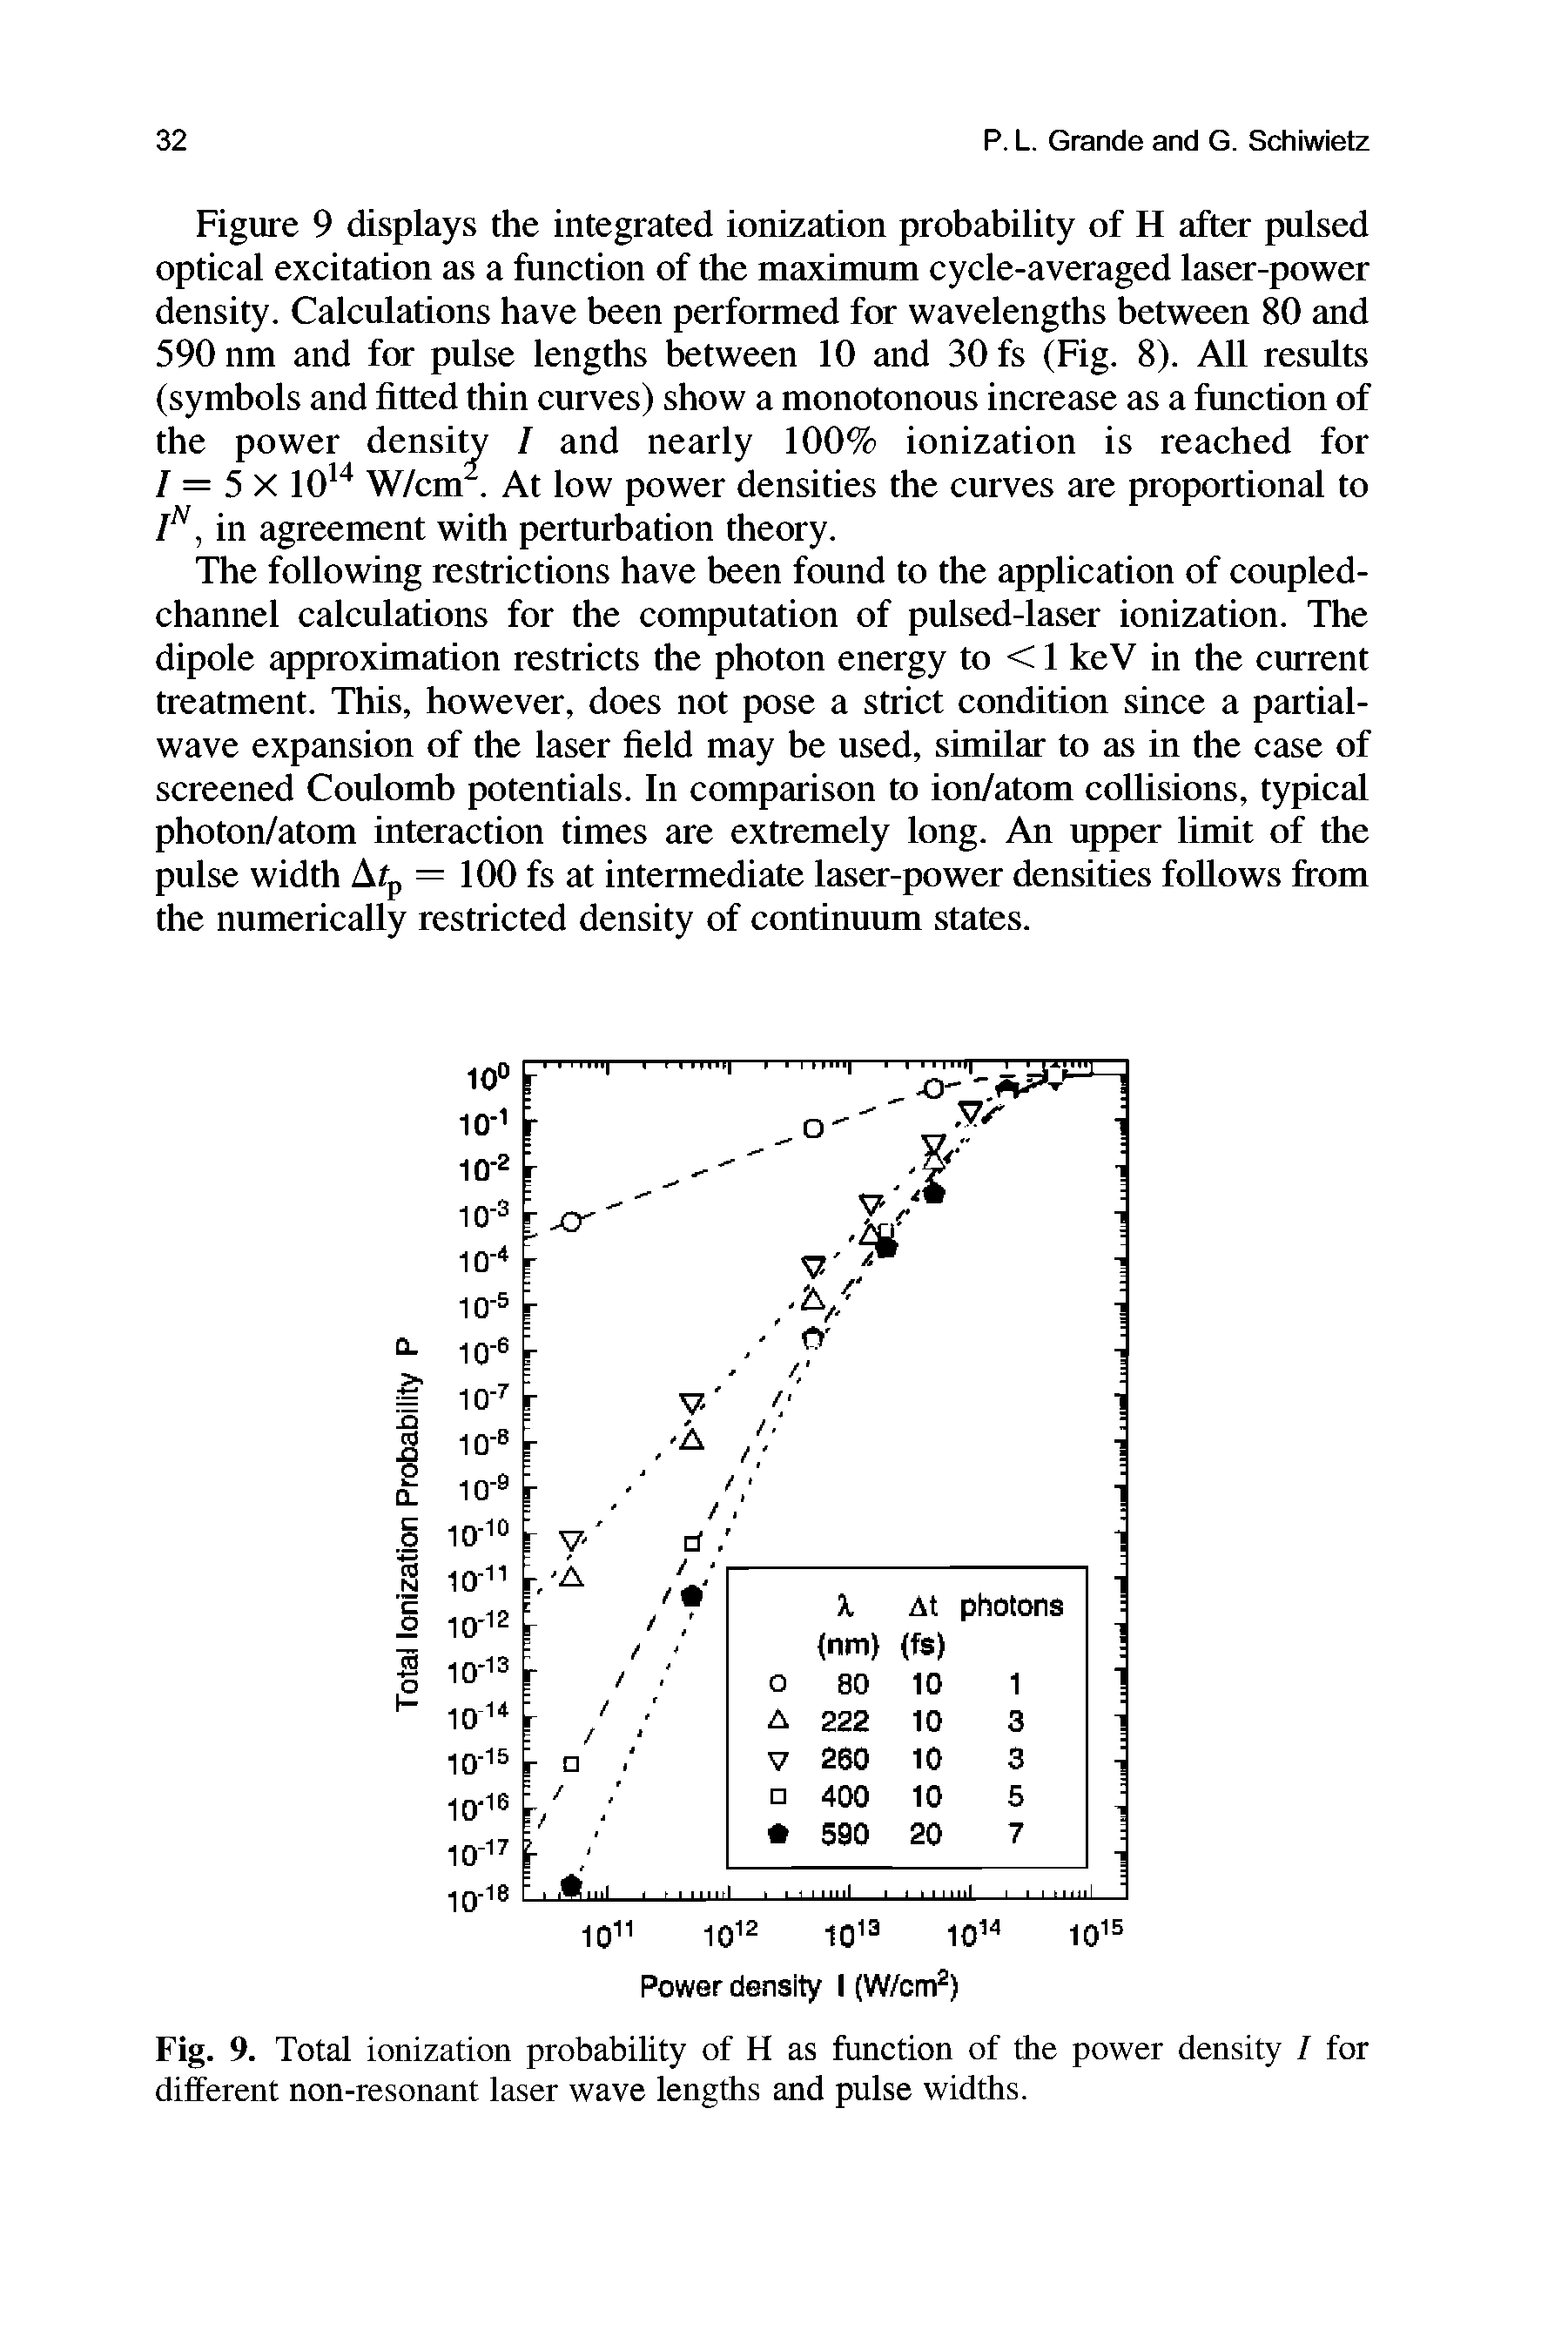 Figure 9 displays the integrated ionization probability of H after pulsed optical excitation as a function of the maximum cycle-averaged laser-power density. Calculations have been performed for wavelengths between 80 and 590 nm and for pulse lengths between 10 and 30 fs (Fig. 8). All results (symbols and fitted thin curves) show a monotonous increase as a function of the power density I and nearly 100% ionization is reached for I = 5 X lO " W/cm. At low power densities the curves are proportional to...